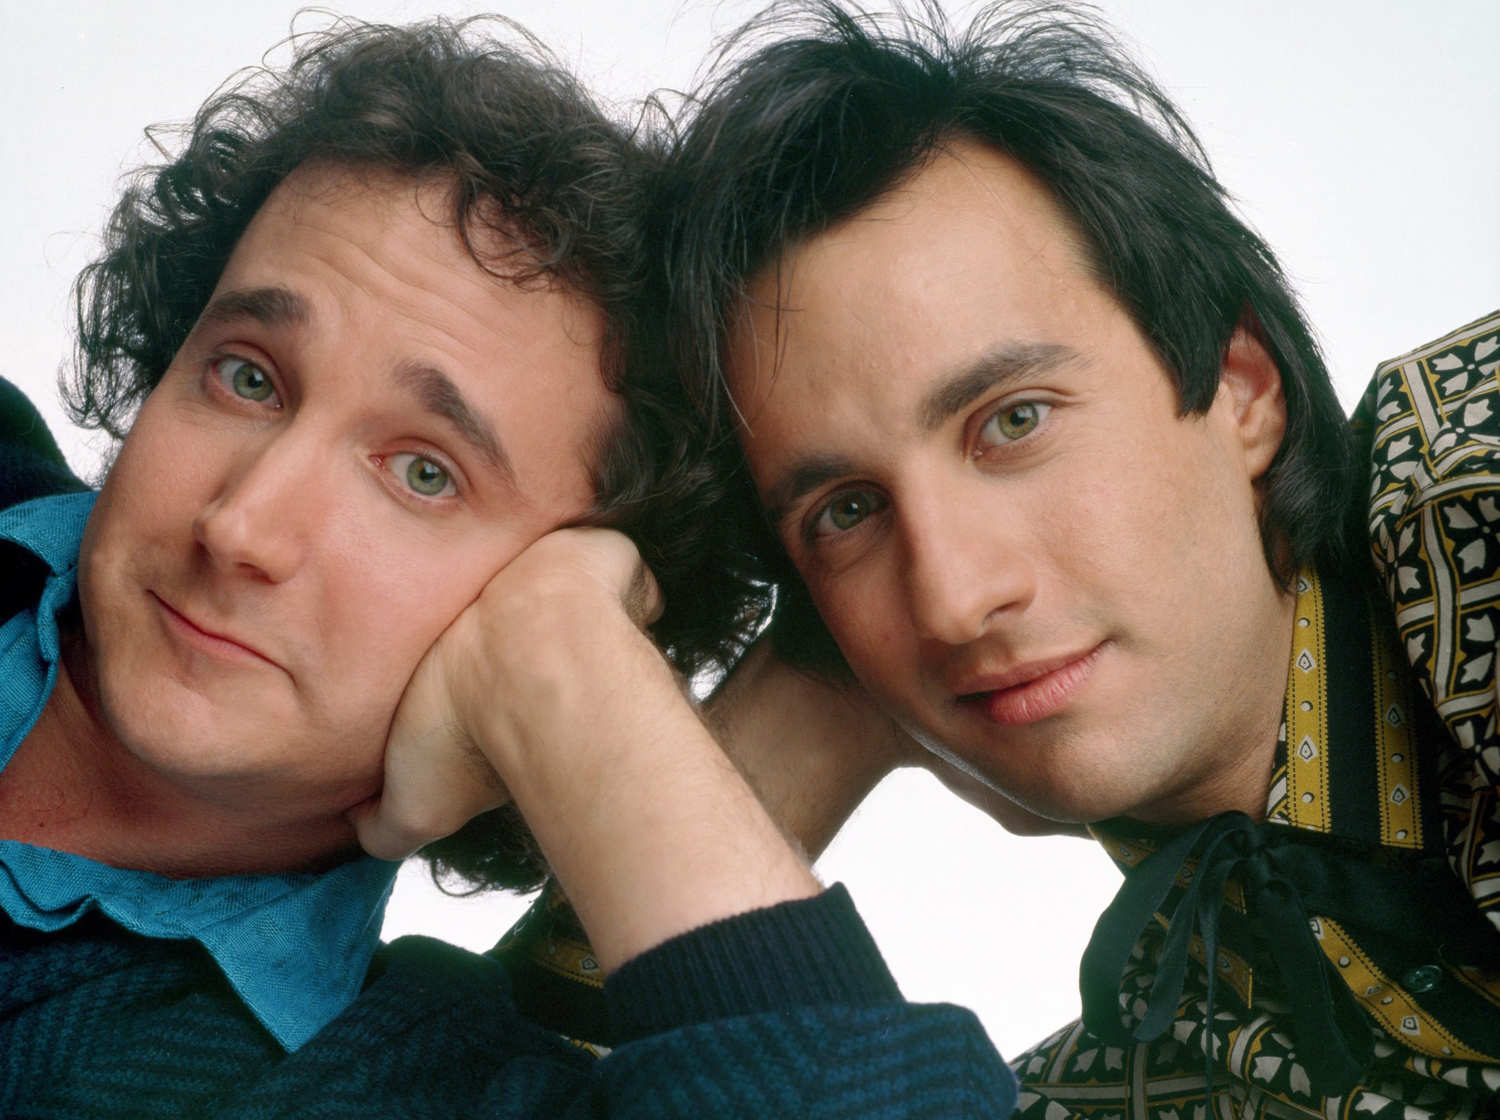 If you don’t have Travis’s luck, where are you watching the Lions tomorrow?  Perfect-strangers-tv-show